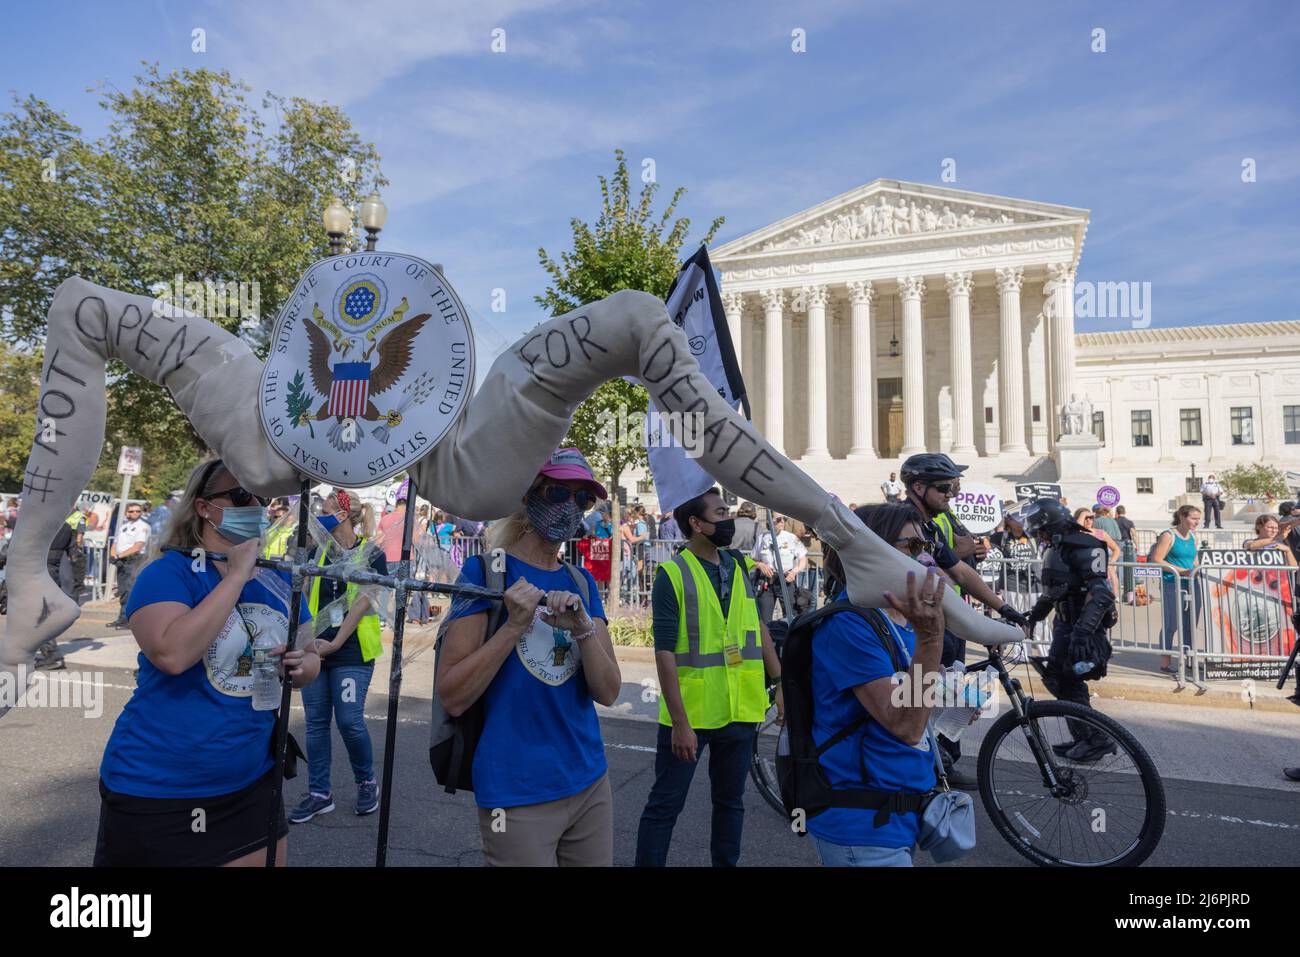 WASHINGTON, D.C. – October 2, 2021: Demonstrators participating in the 2021 Women’s March protest near the United States Supreme Court. Stock Photo